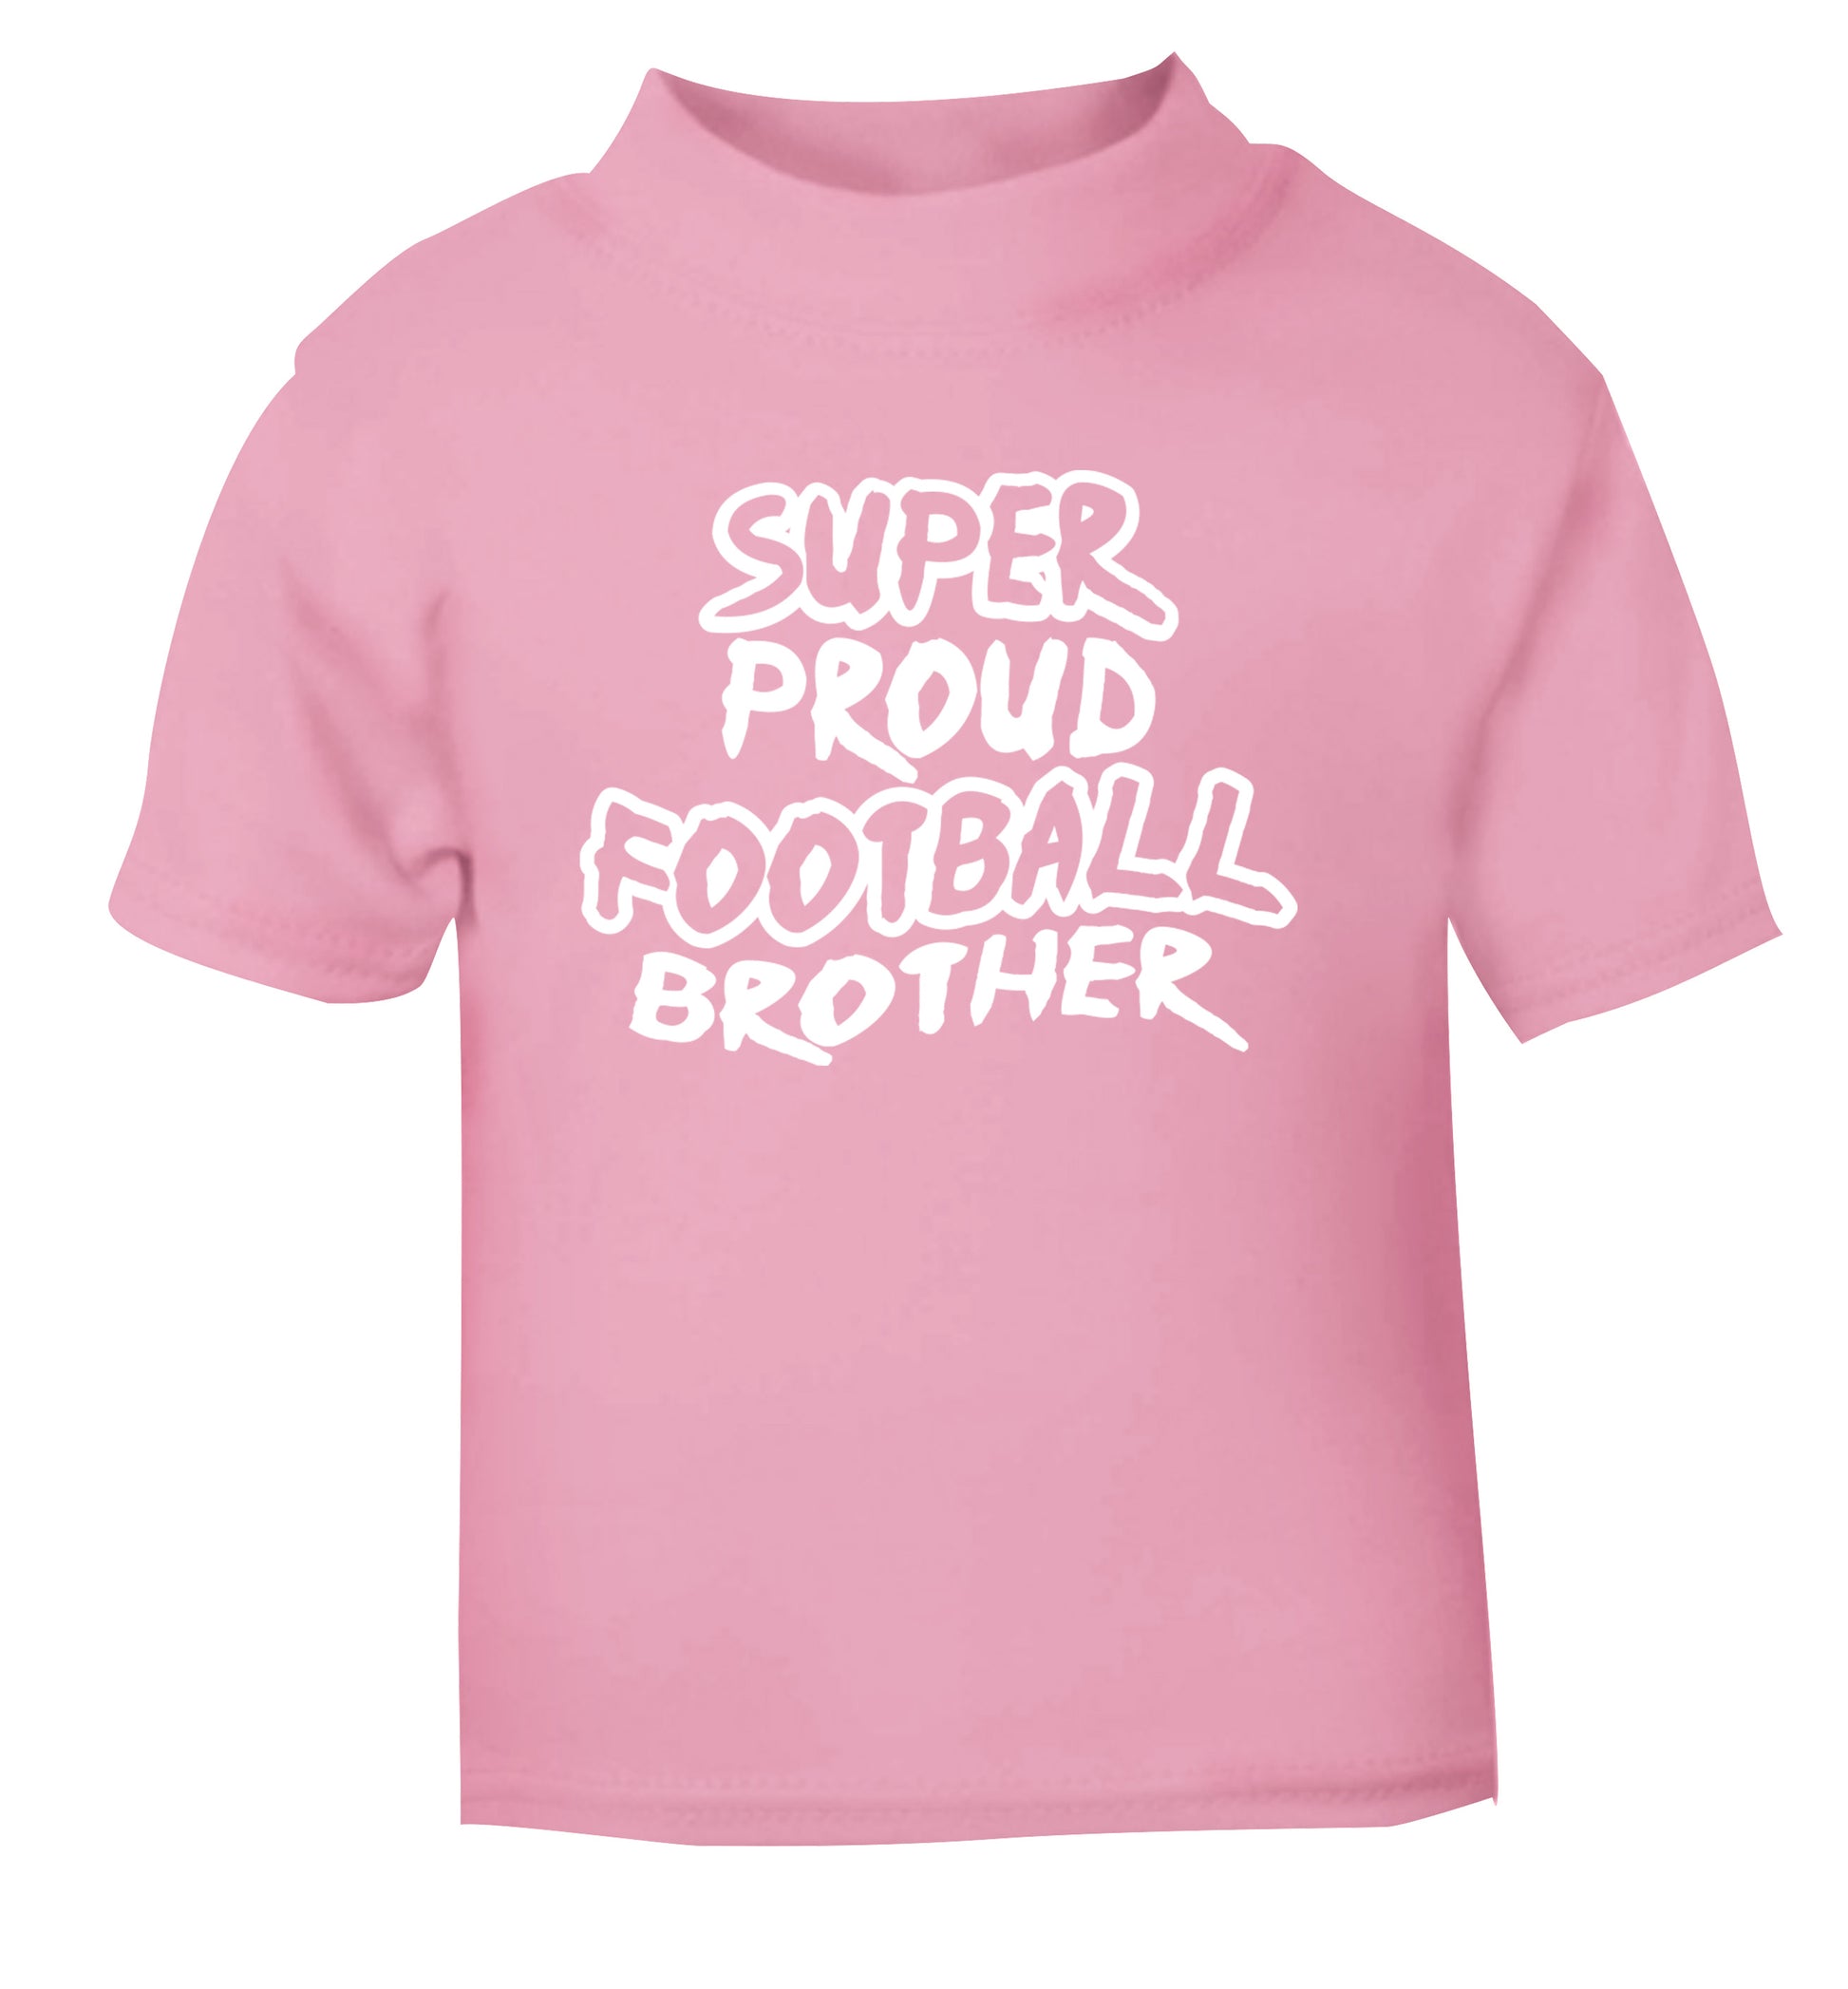 Super proud football brother light pink Baby Toddler Tshirt 2 Years